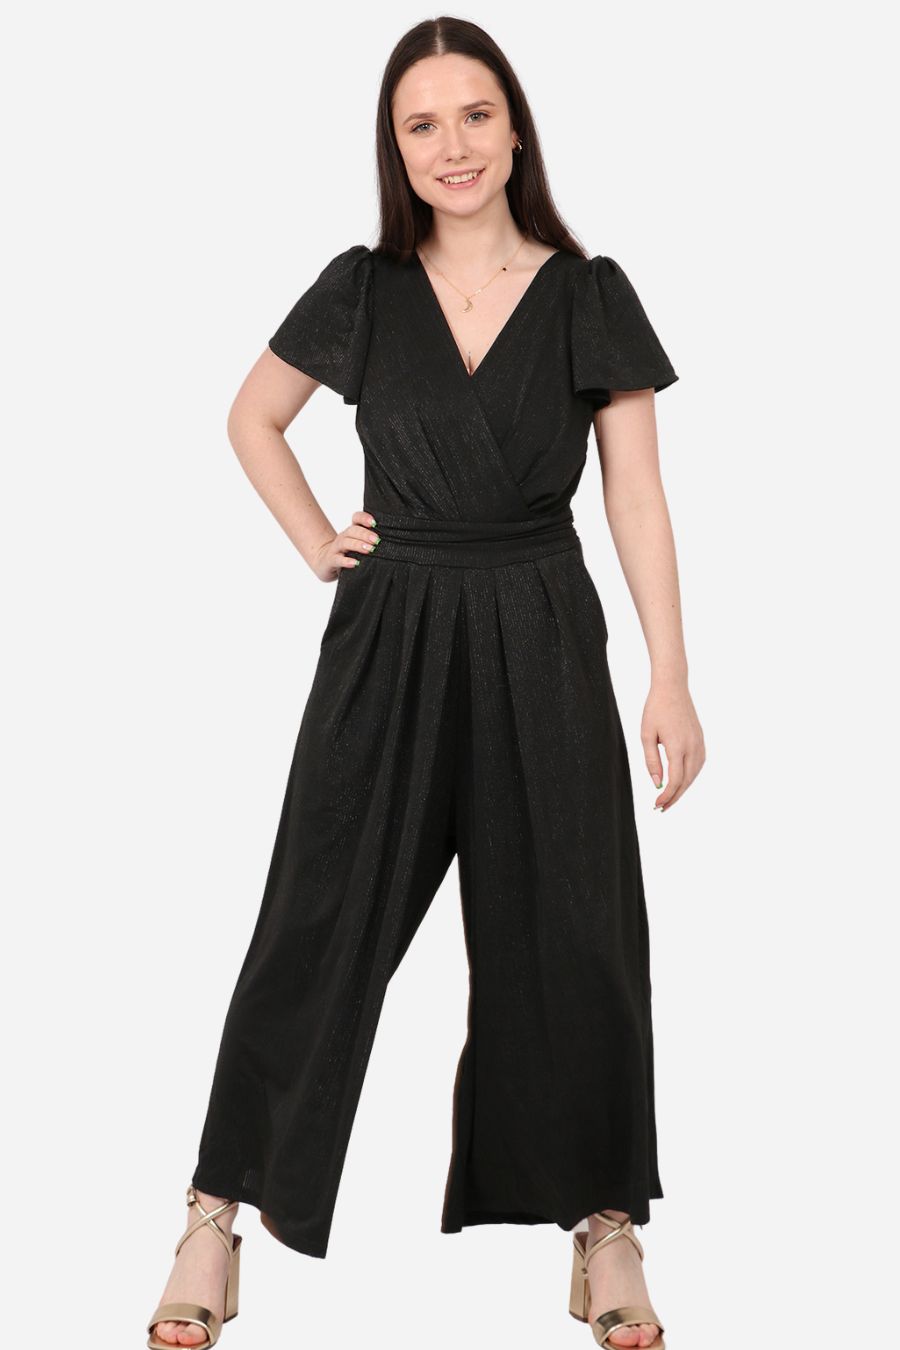 Model wearing black glitter jumpsuit with v-neck and tie waist